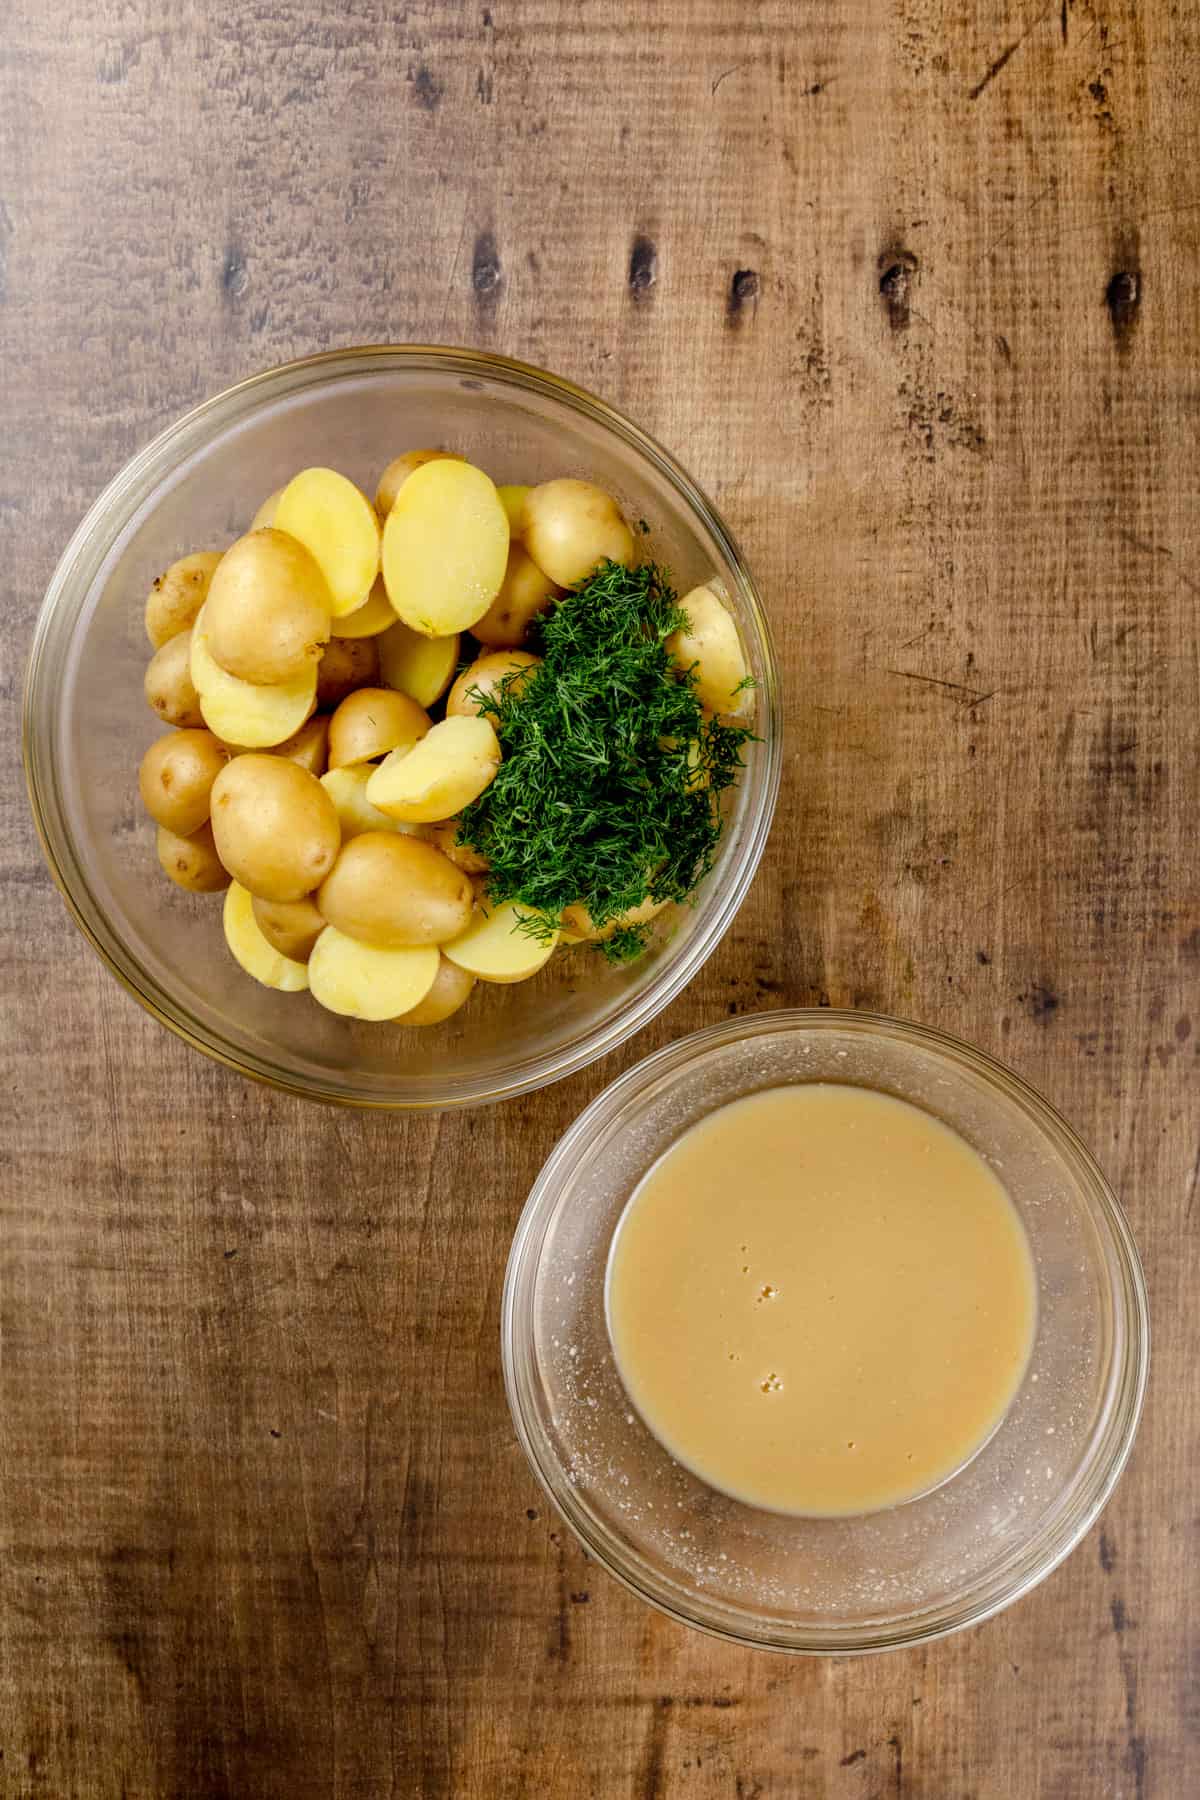 Two glass bowls on a wood tabletop filled with the dressing in one and the cooked potatoes in the other.